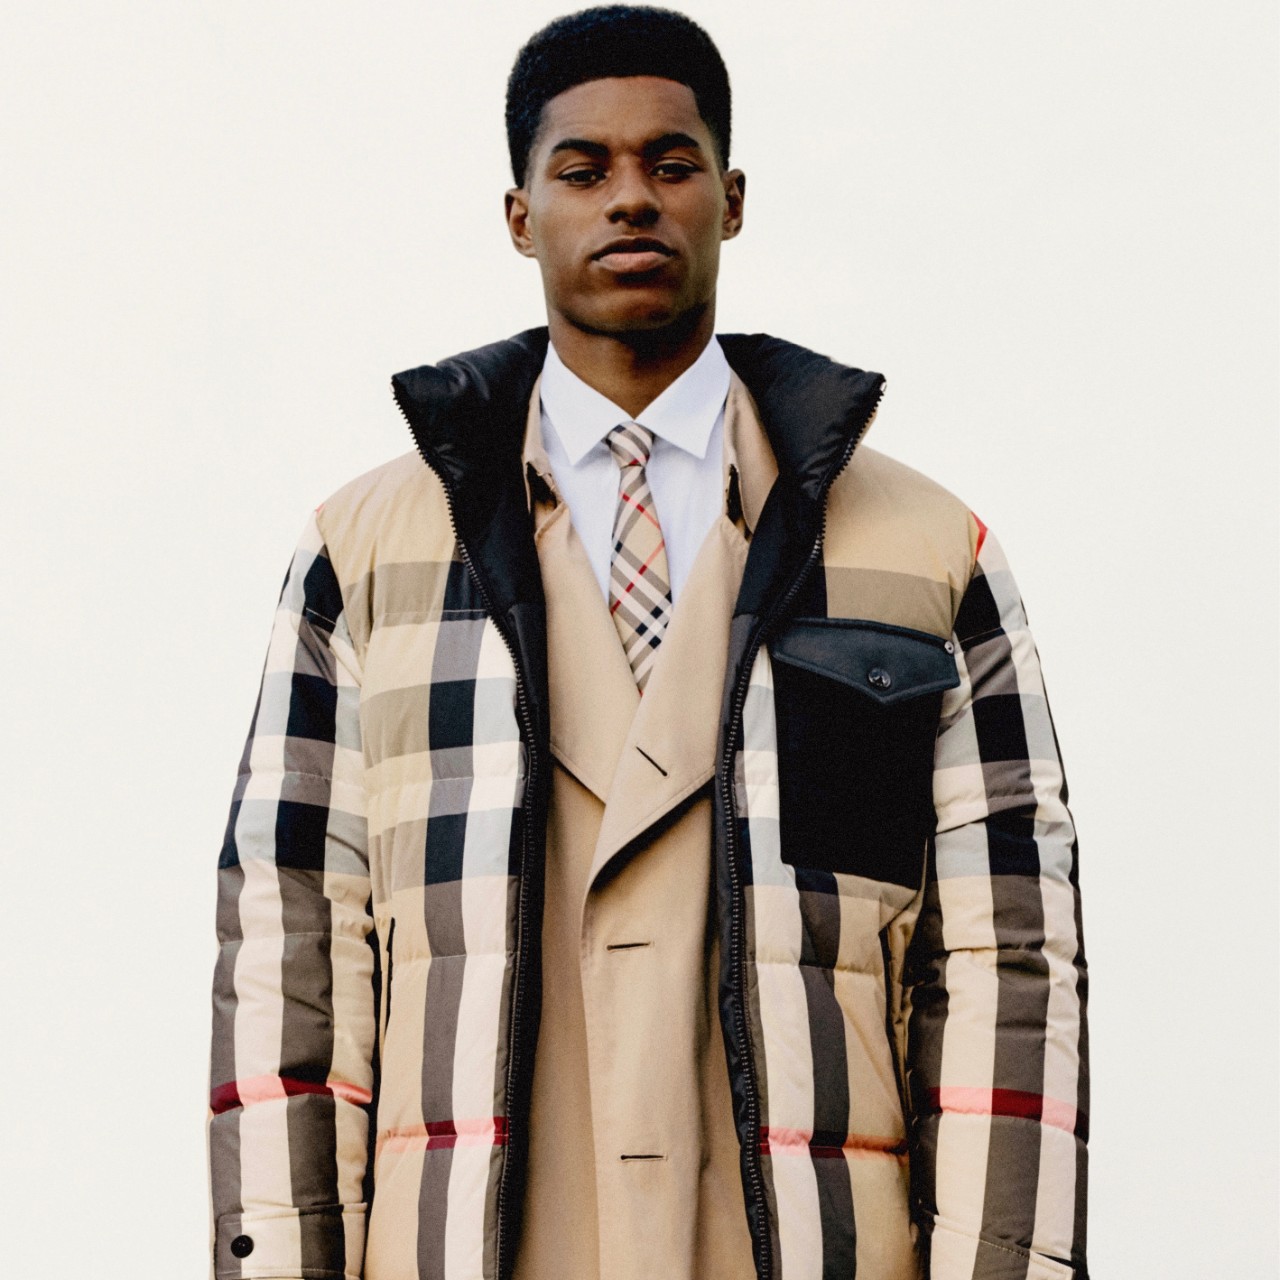 Burberry Looks Online for Ways to Gain Customers